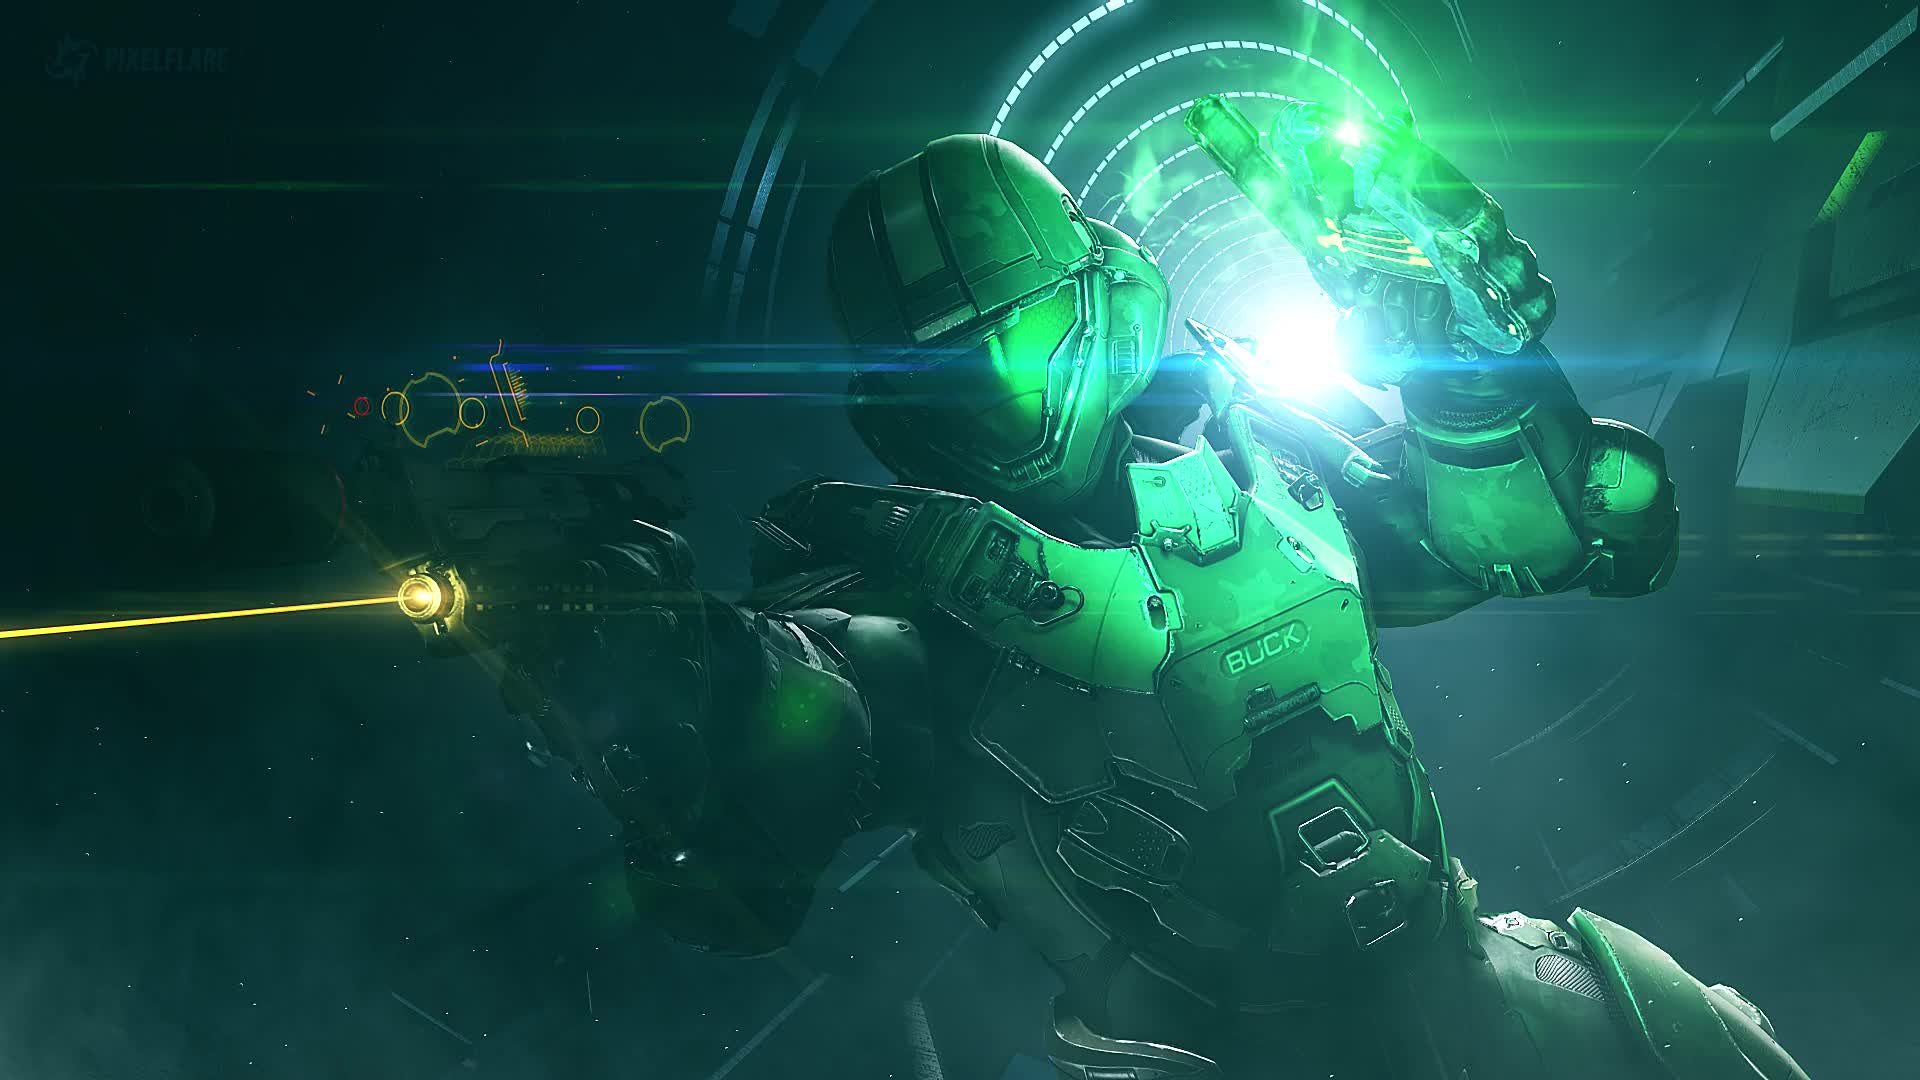 halo wallpaper,green,pc game,digital compositing,technology,personal protective equipment